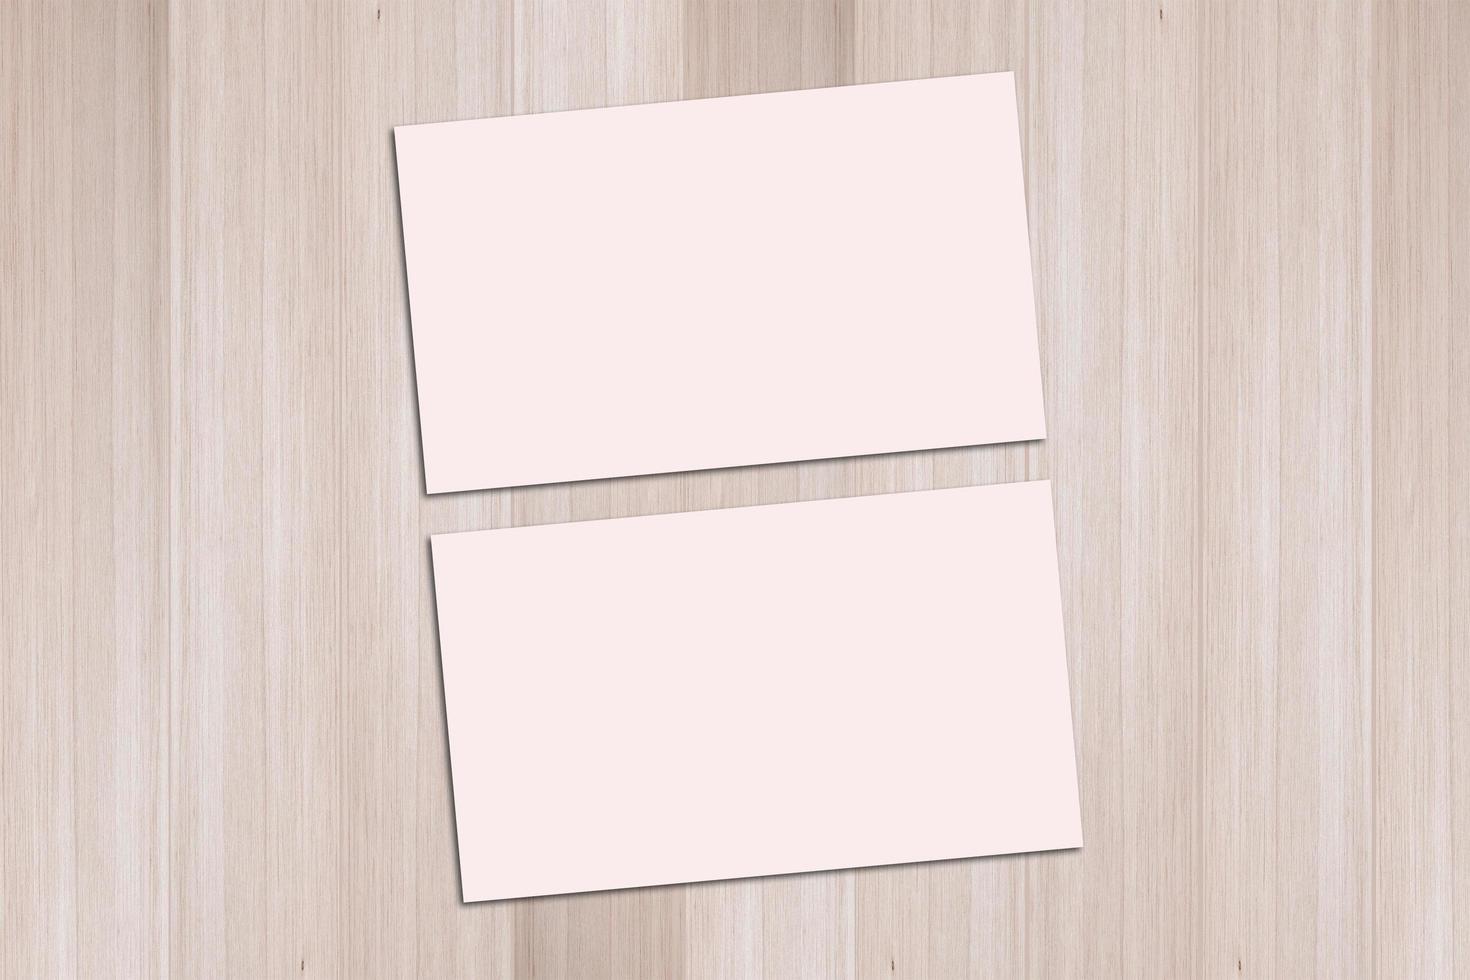 Card Mockup, Blank Card Picture, Empty White Card Picture photo